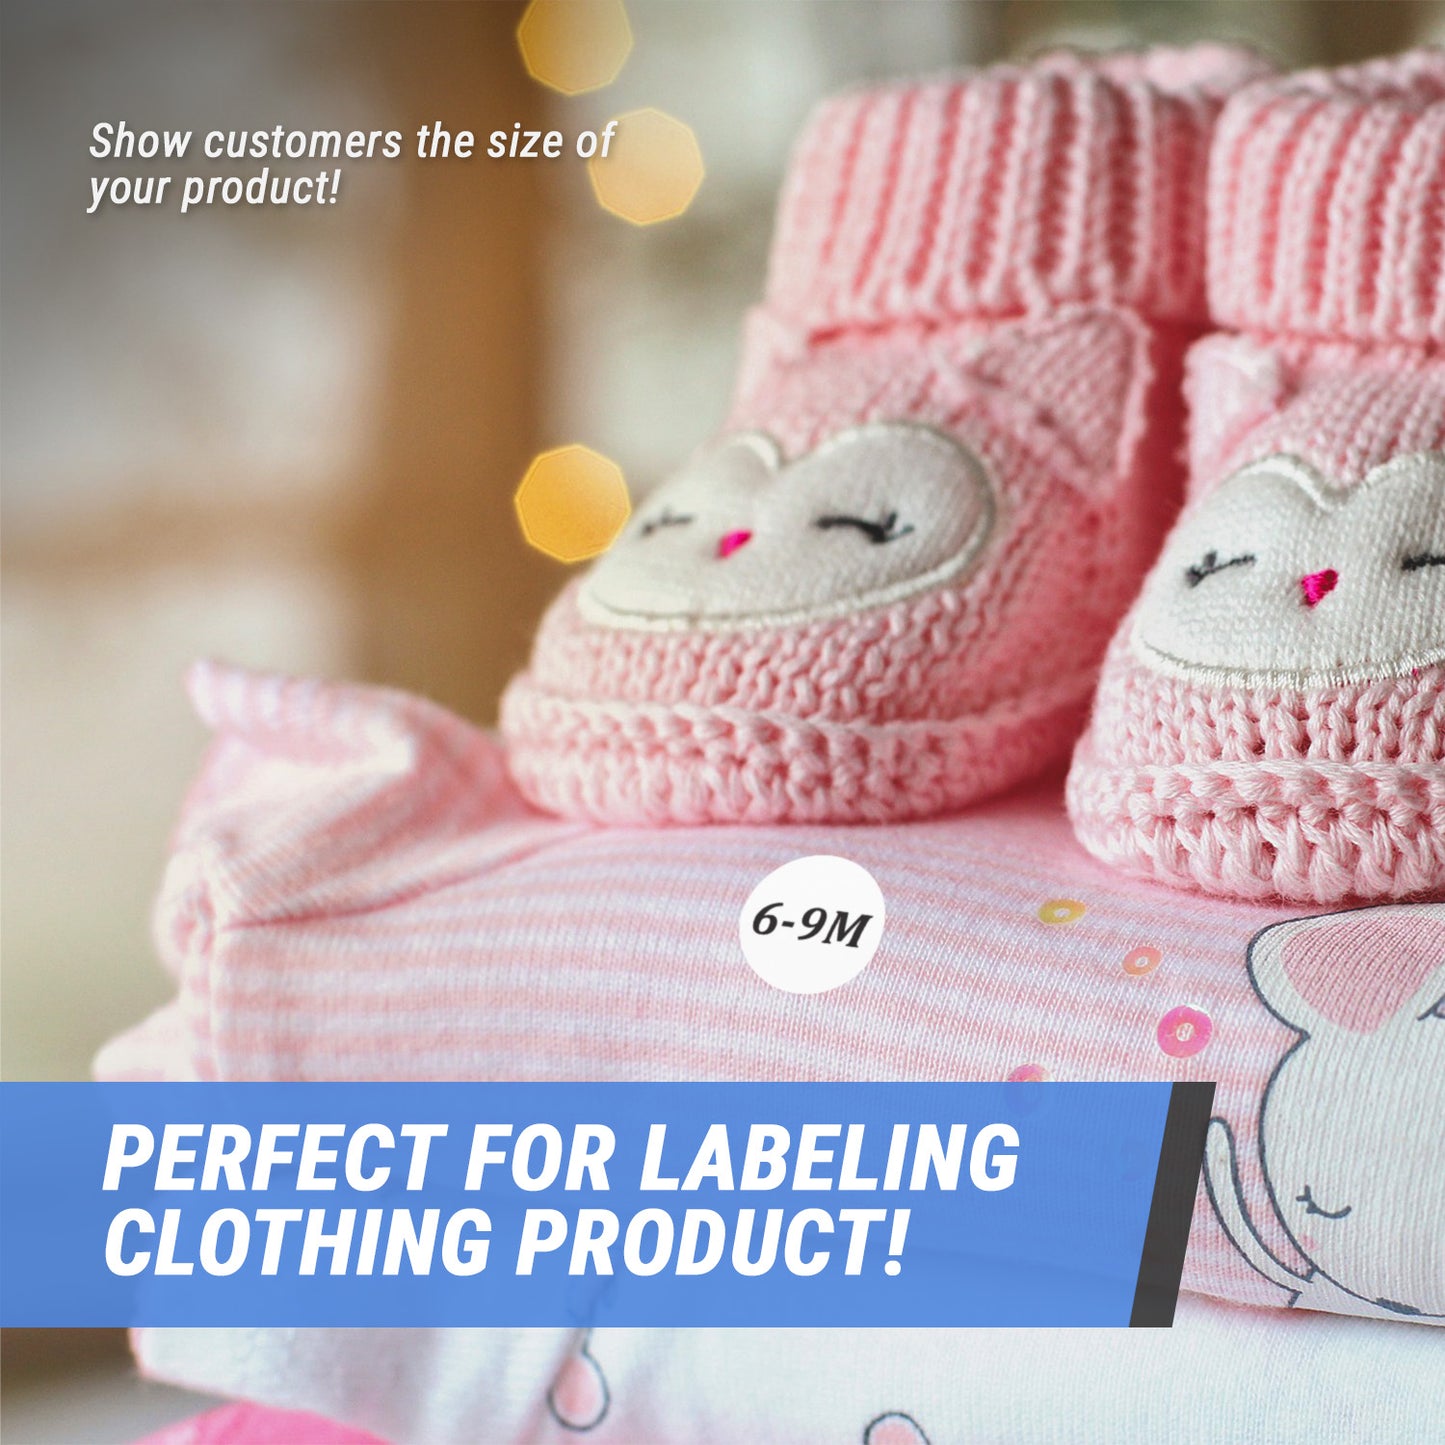 1.25 inch | Shoe & Clothing Size: Baby Clothing (6-9M) 6 to 9 Months Stickers